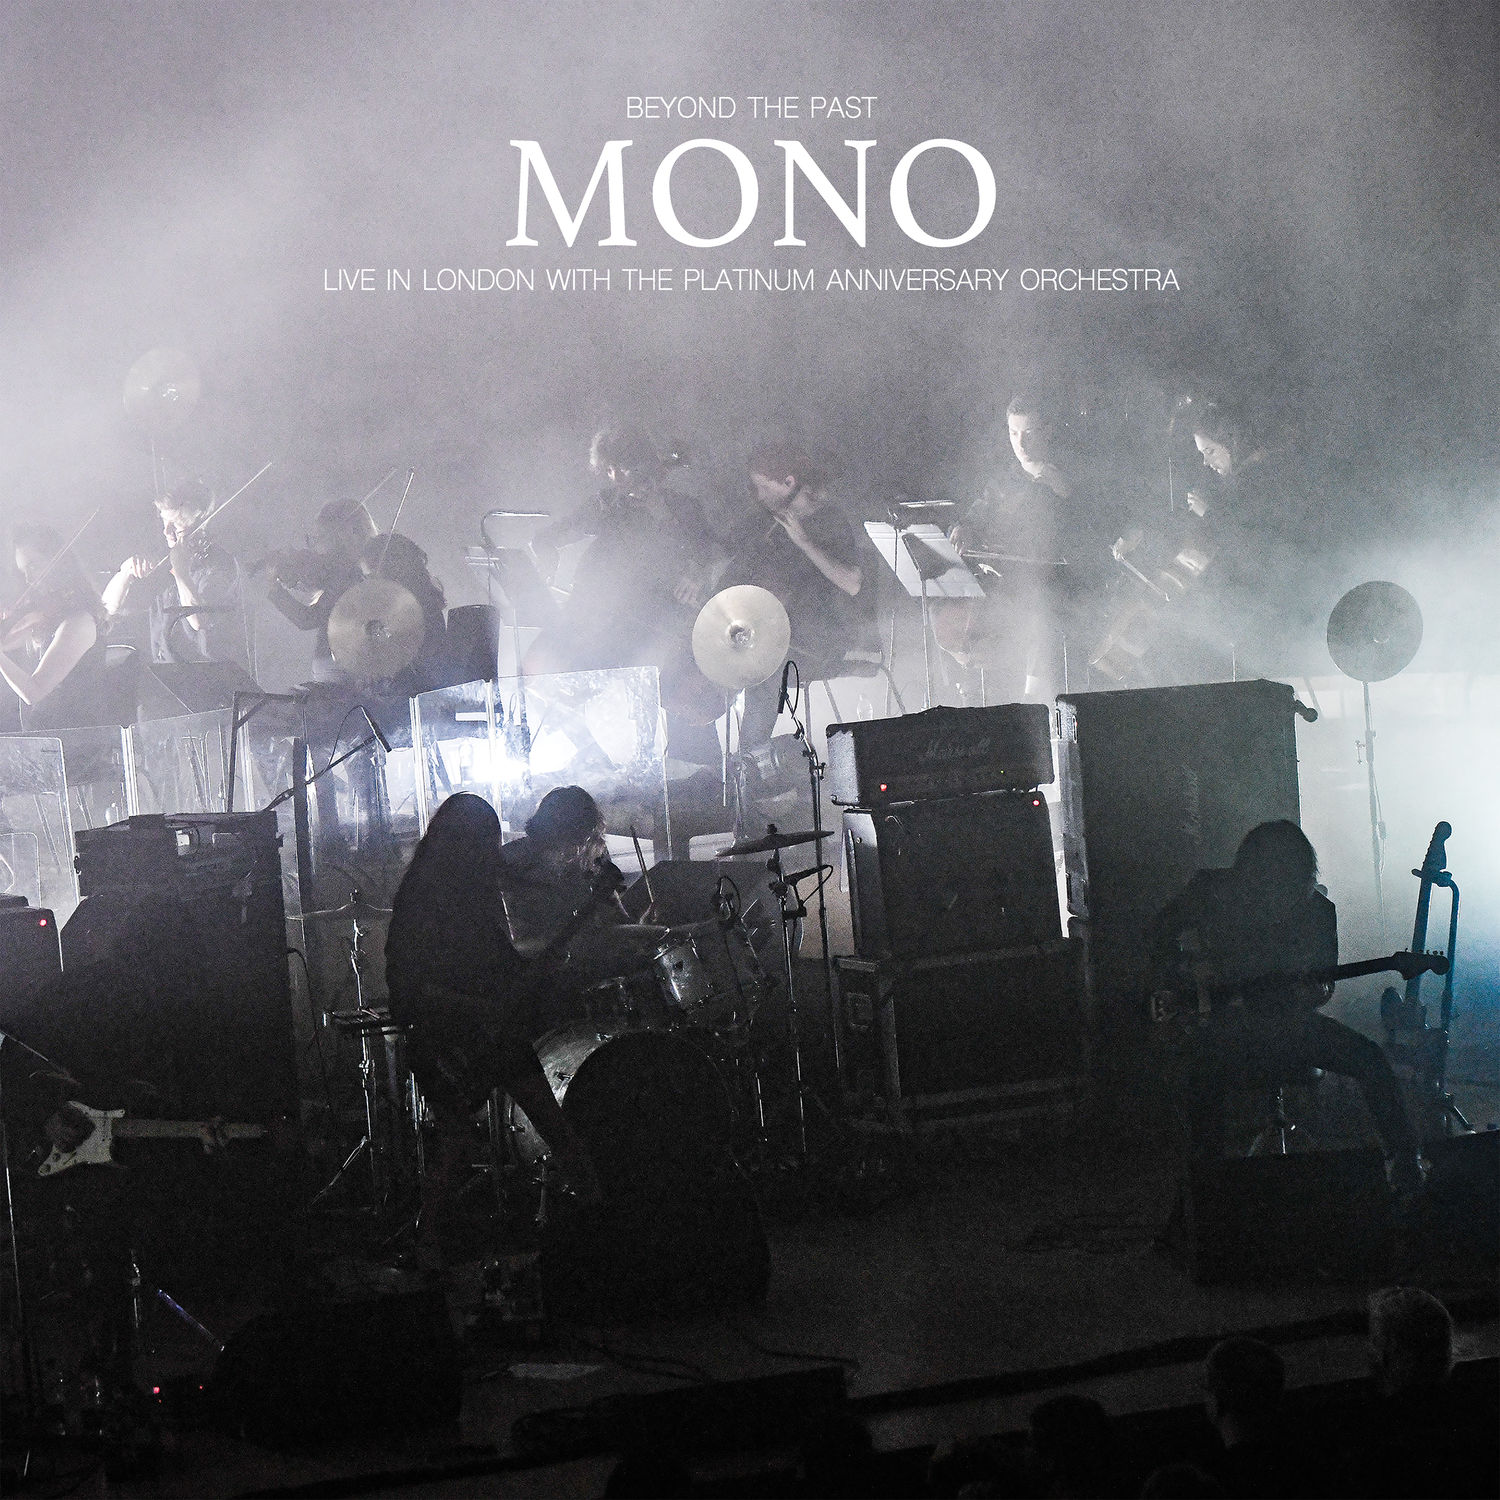 Mono - Beyond the Past - Live in London with the Platinum Anniversary Orchestra (2021) [FLAC 24bit/96kHz]